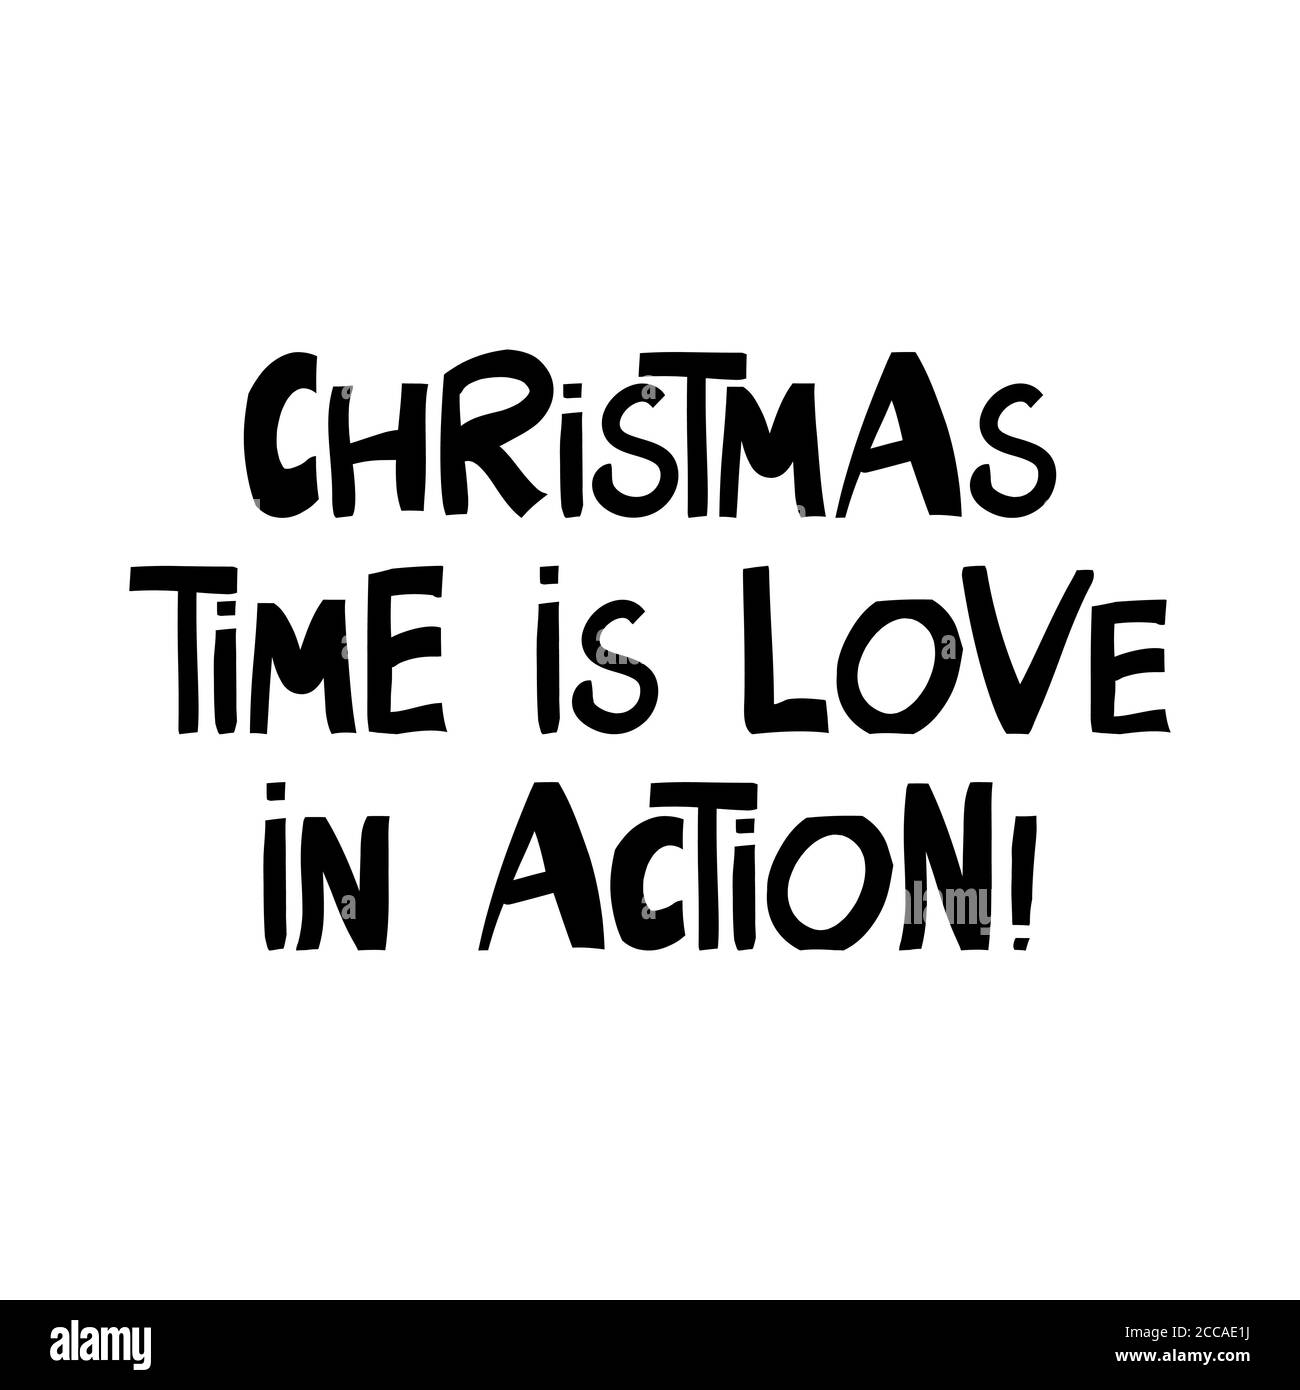 Christmas time is love in action. Winter holidays quote. Cute hand drawn lettering in modern scandinavian style. Isolated on white background. Vector Stock Vector